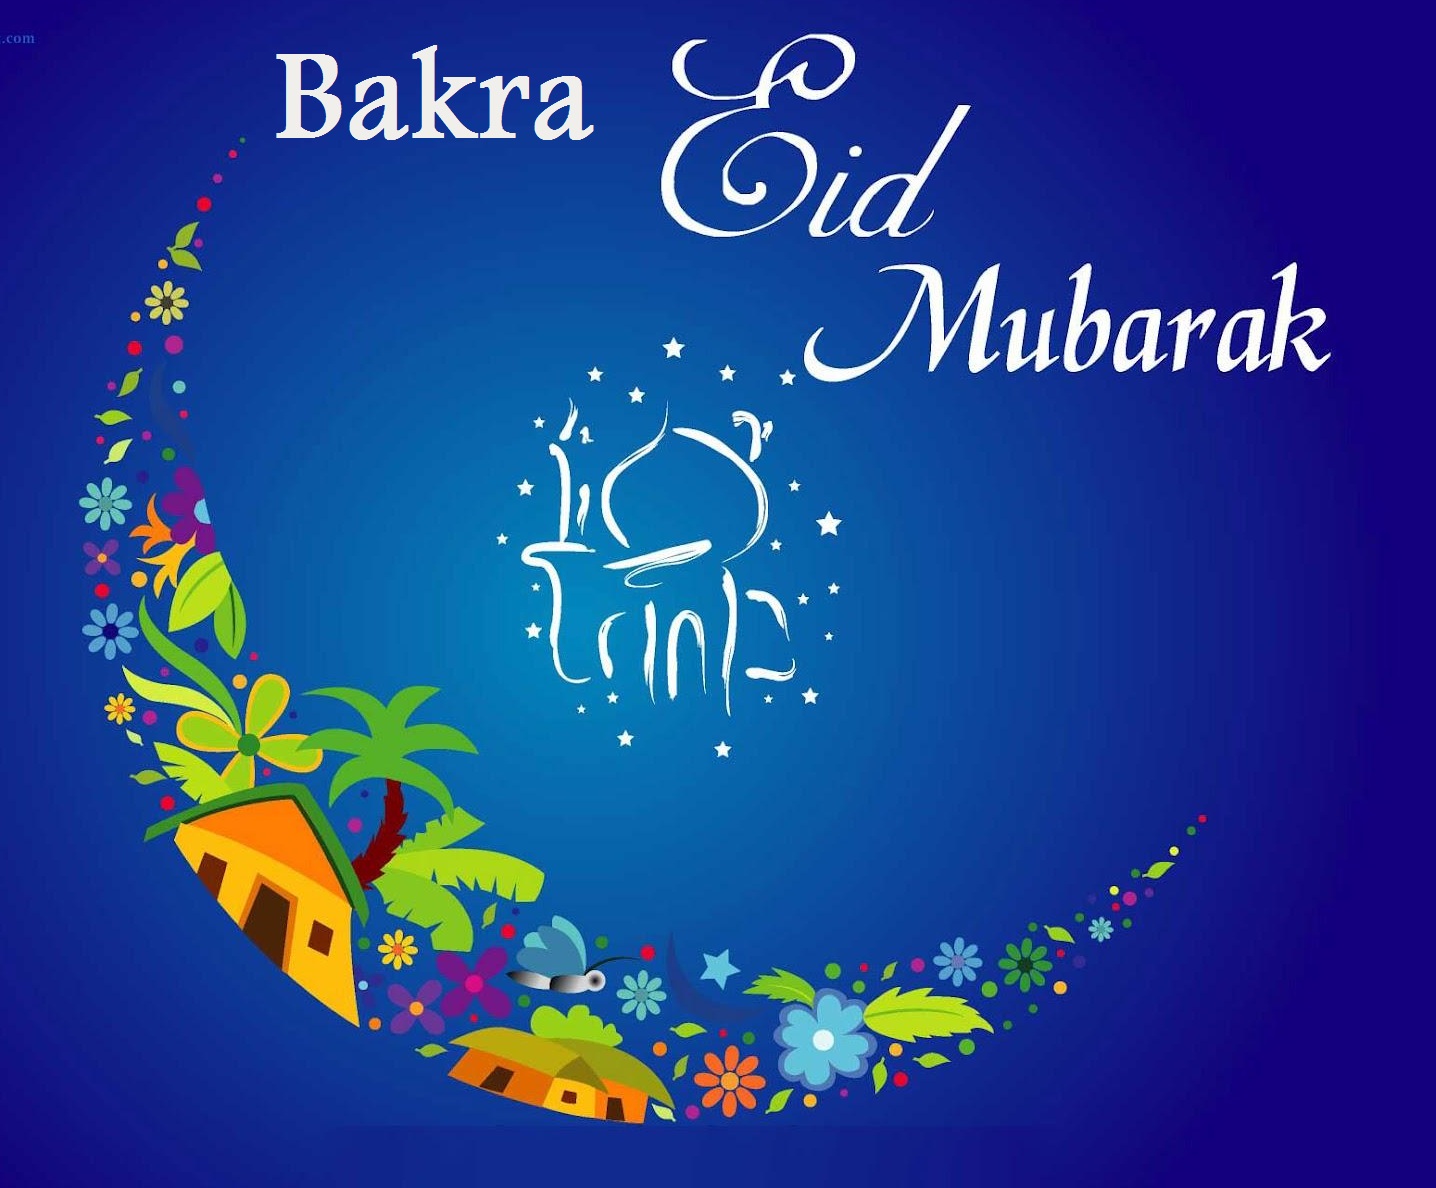 Eid ul-Adha Images, Pictures, Wallpapers, WhatsApp DP, Pics for one and all